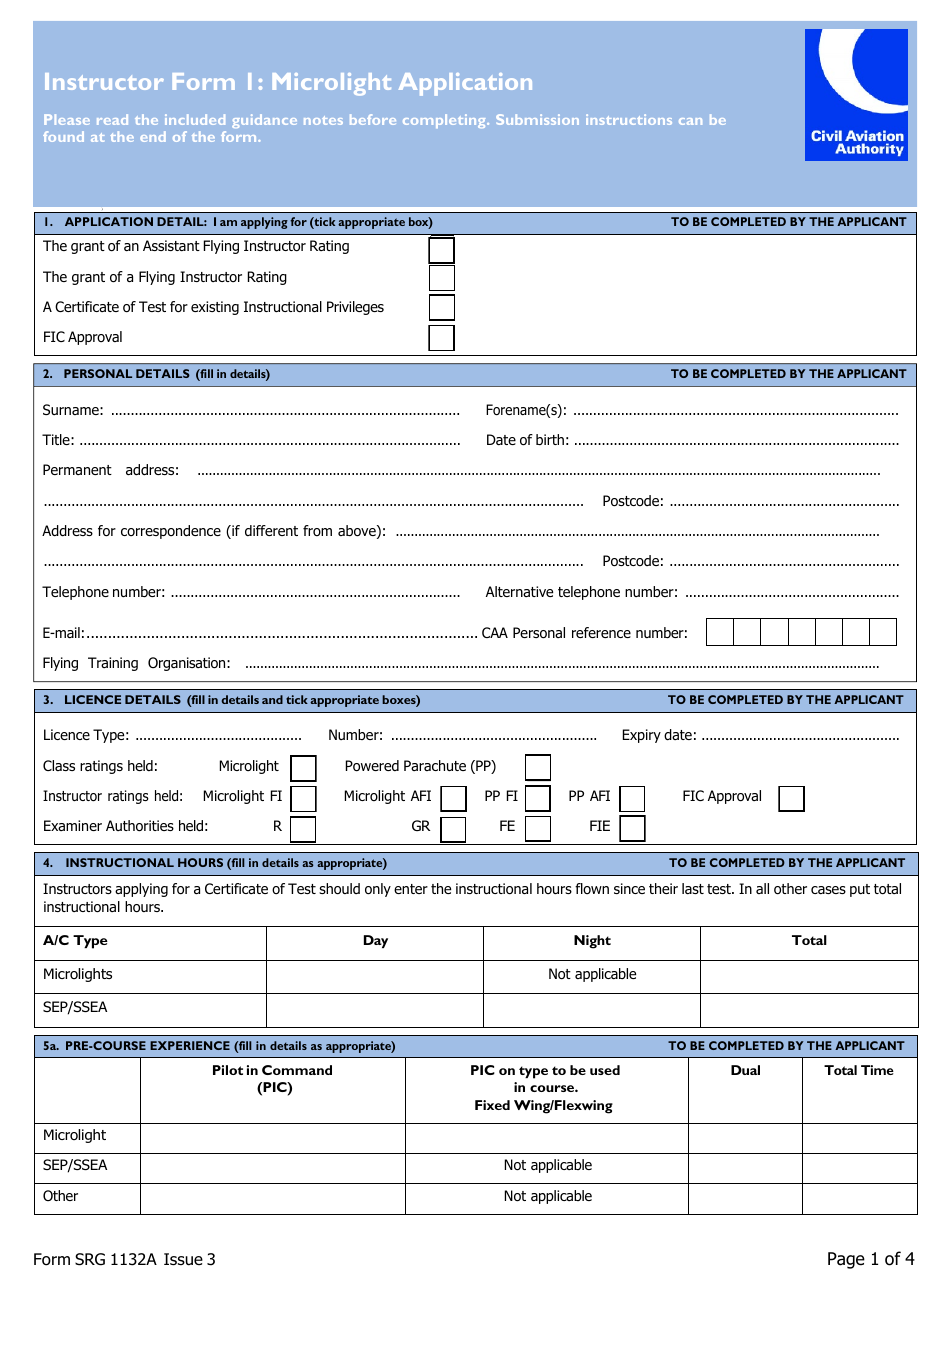 Instructor Form 1 (SRG1132A) Microlight Application - United Kingdom, Page 1